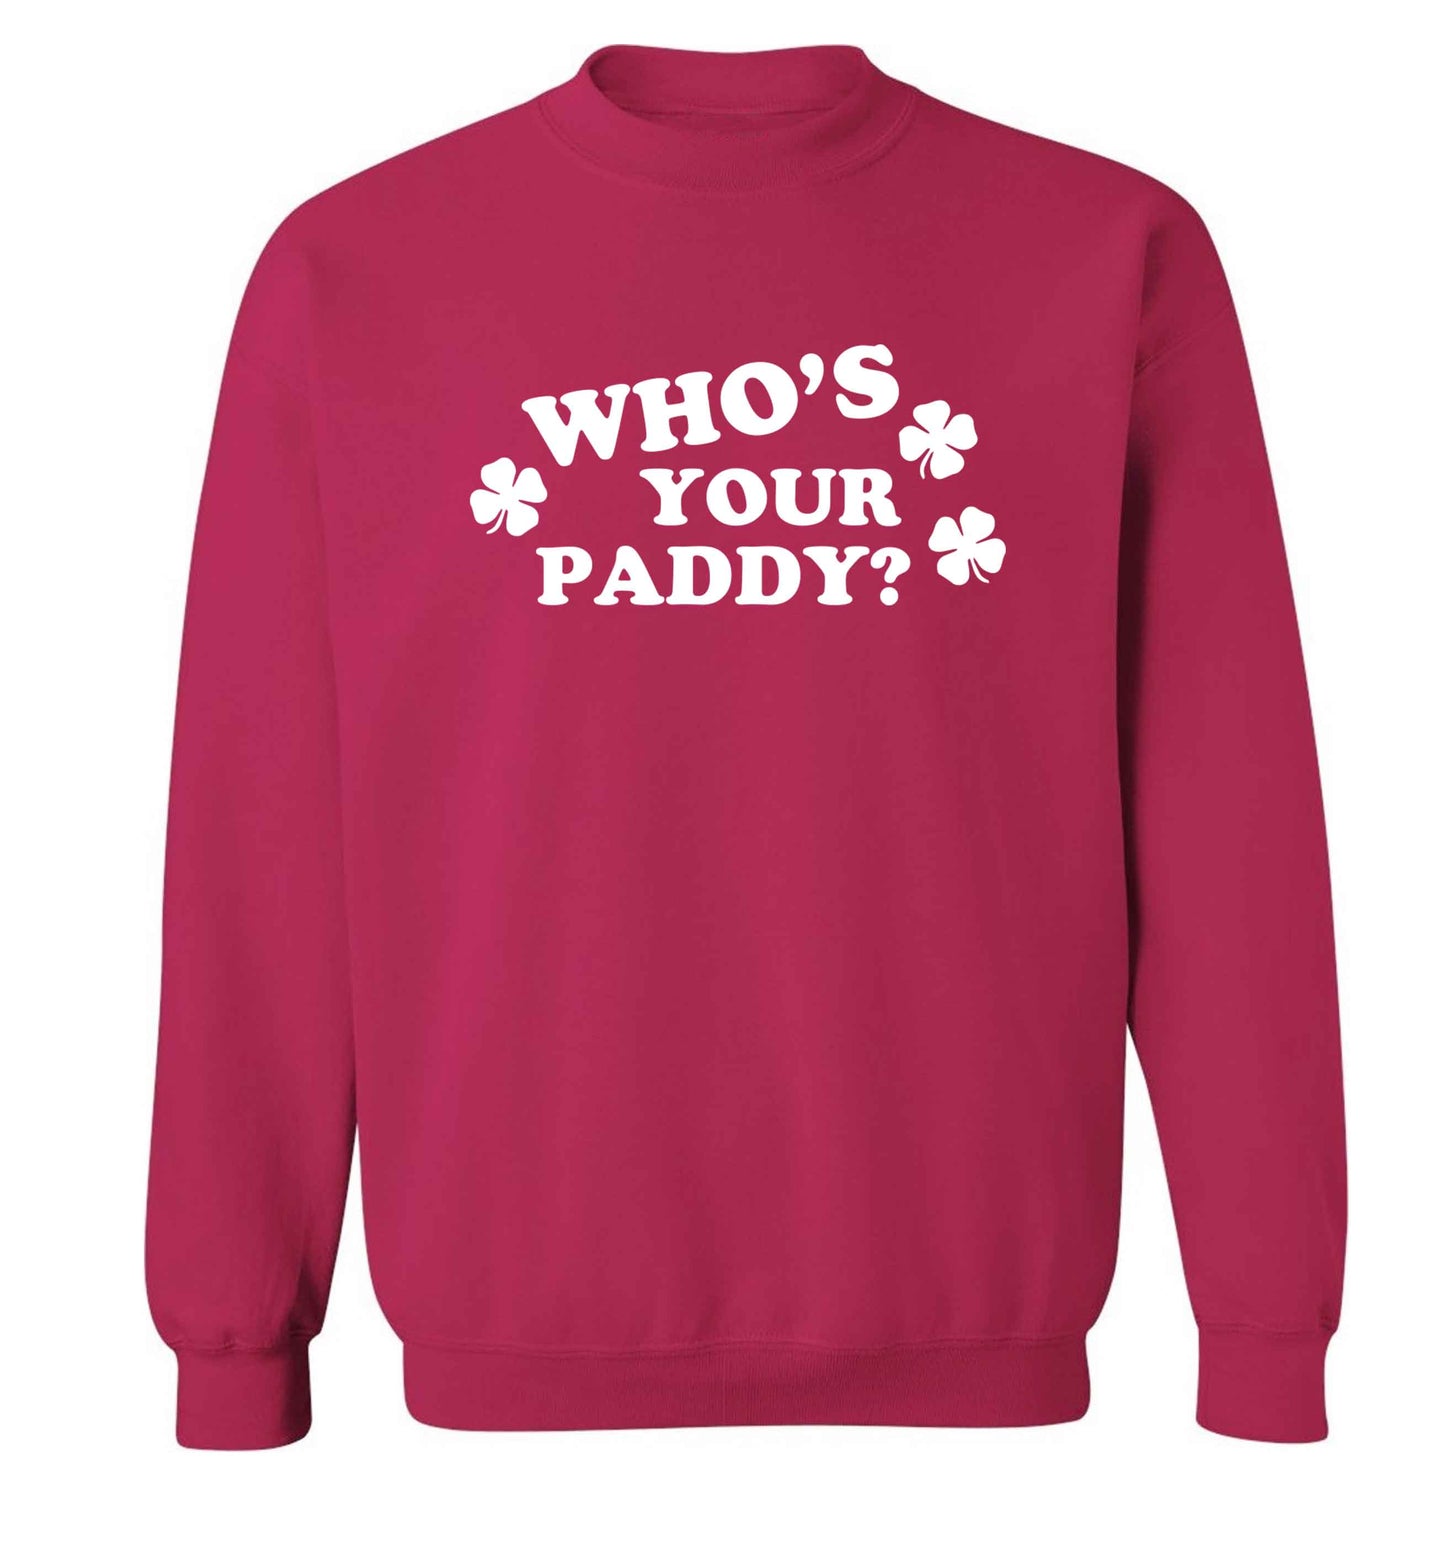 Who's your paddy? adult's unisex pink sweater 2XL